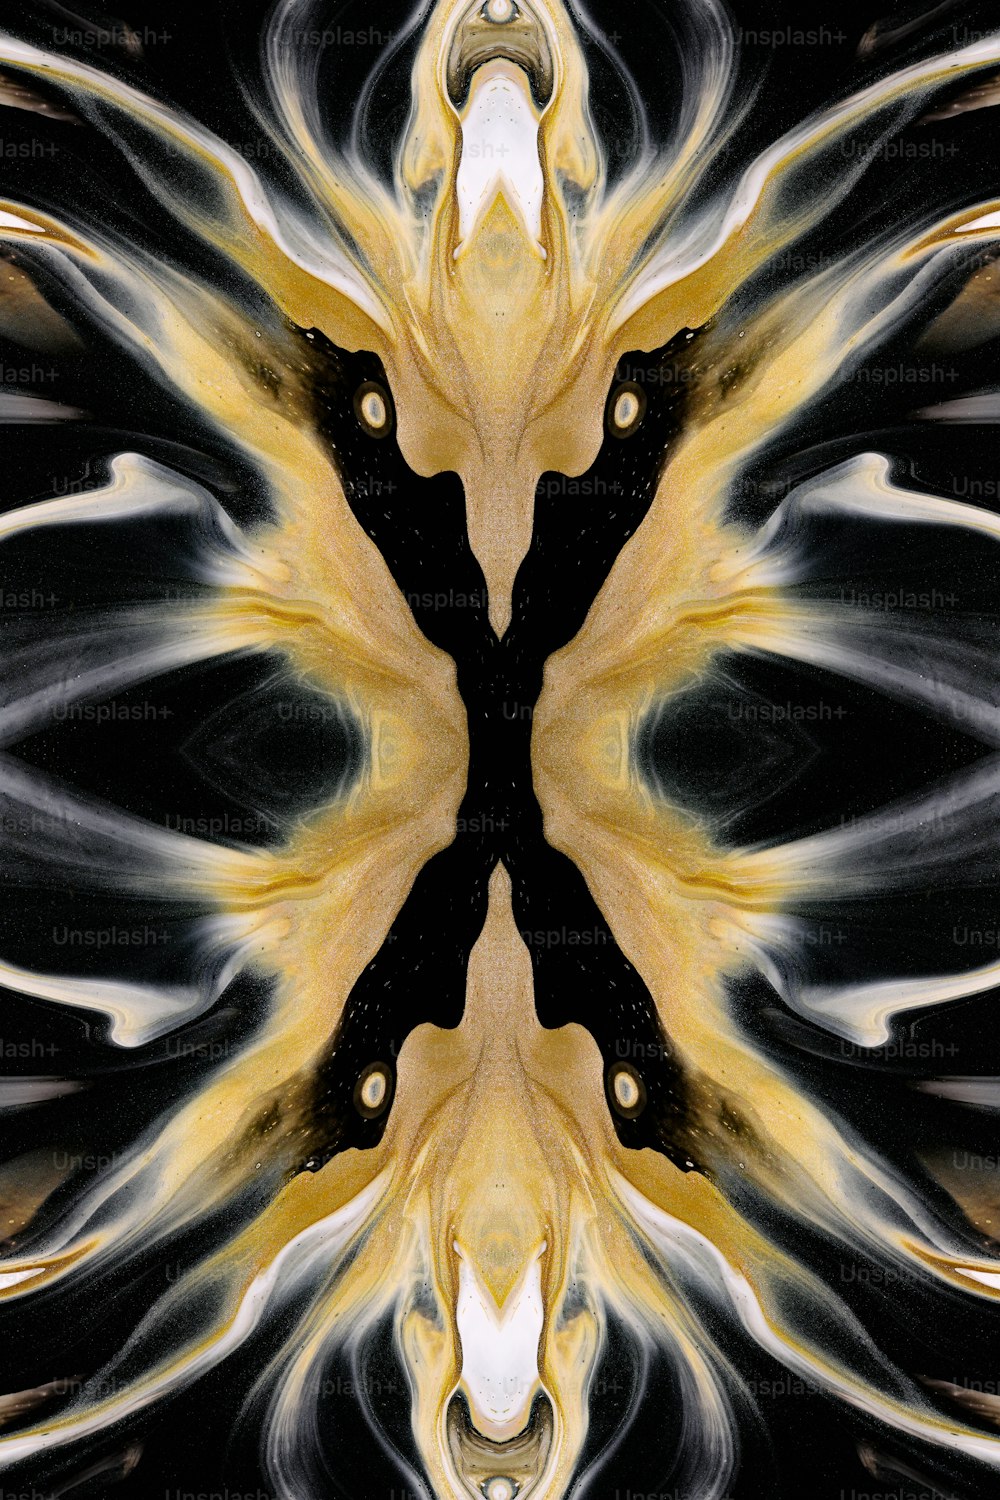 a computer generated image of a black and yellow flower